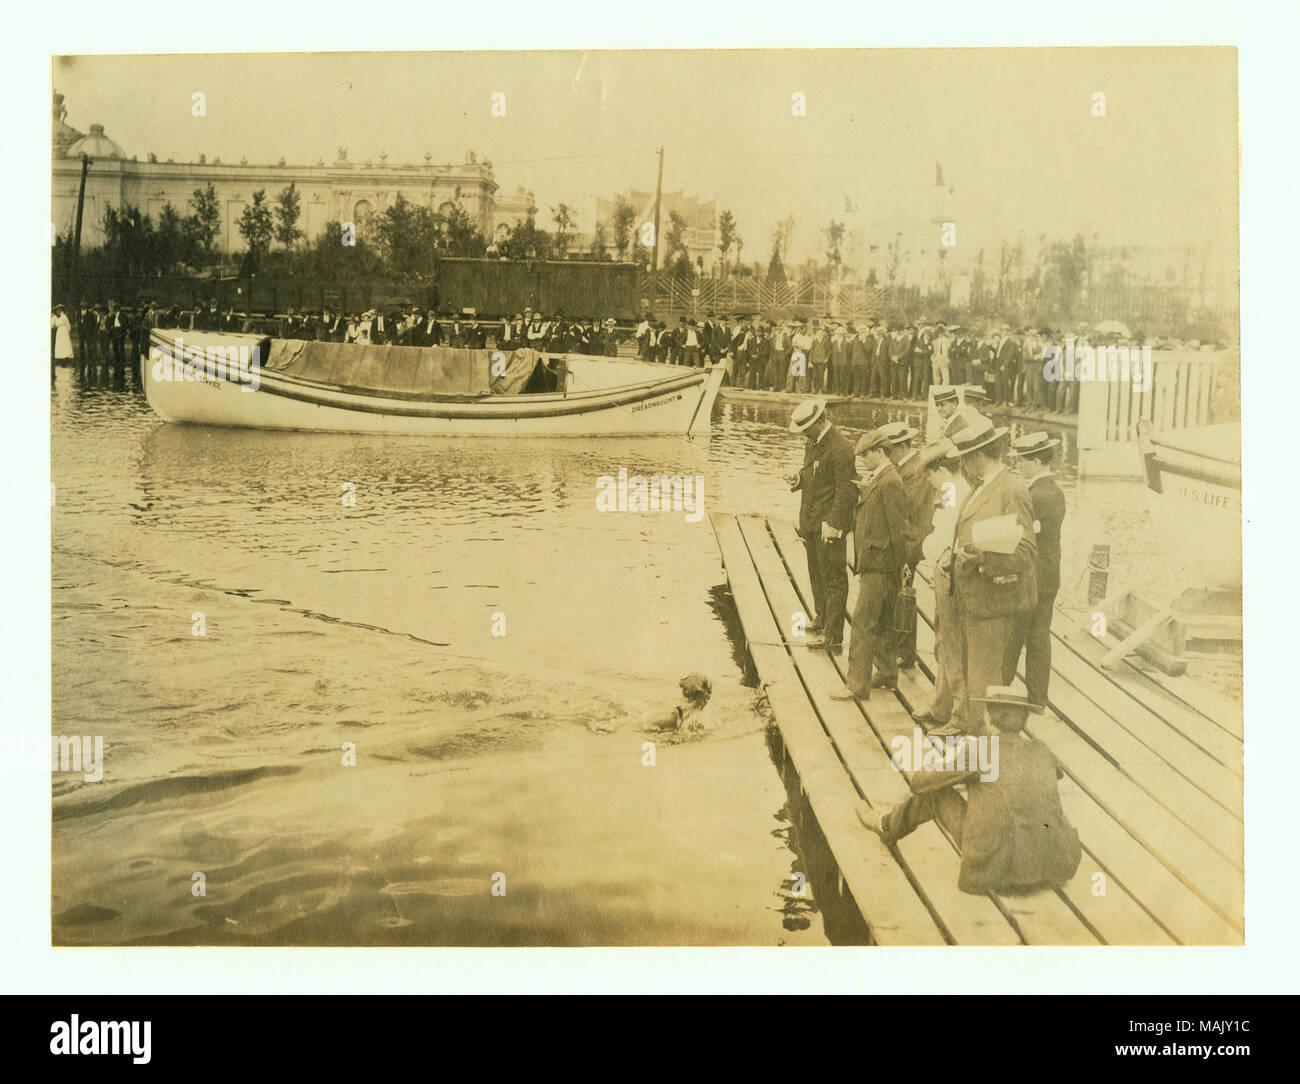 Horizontal photograph of judges standing on a dock looking at a swimmer who has reached the dock. A large crowd of spectators stands on the shore. Title: 1904 Olympics: Daniels of the New York Athletic Club winning the 440 yard swim.  . 1904. Stock Photo